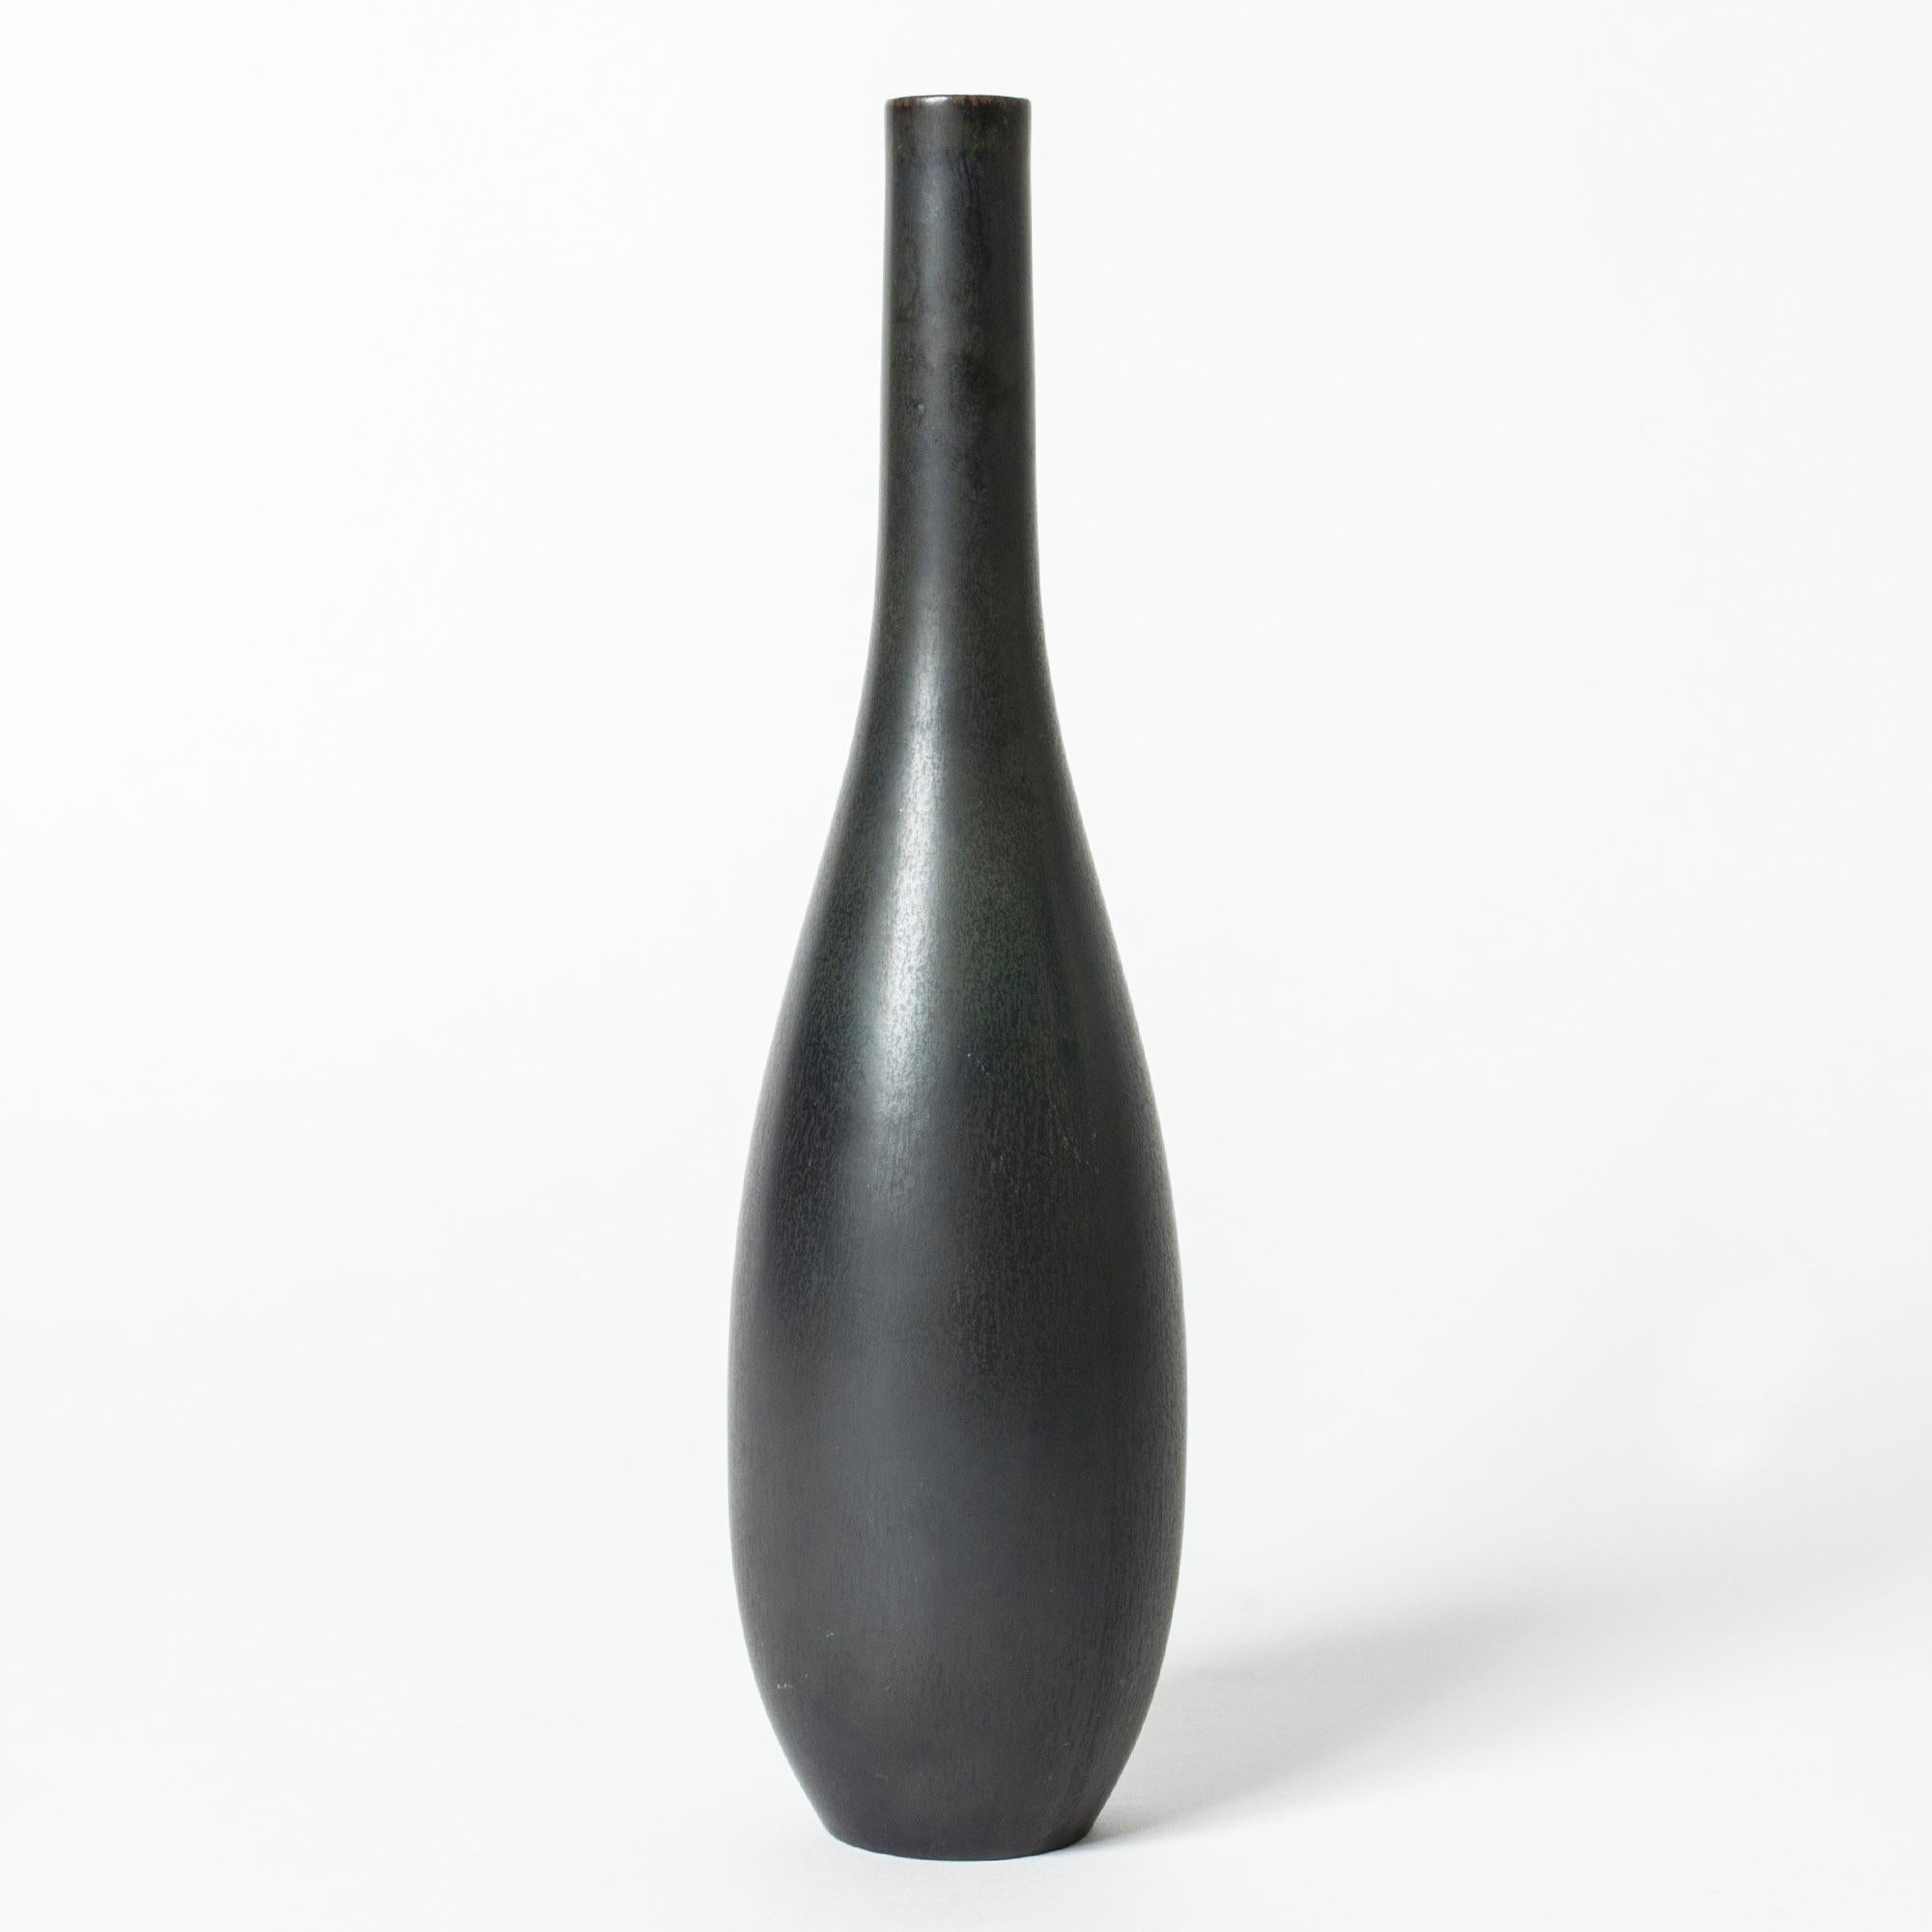 Cool stoneware vase by Carl-Harry Stålhane in a strict form. Dense black hare’s fur glaze.

Carl-Harry Stålhane was one of the stars among Swedish ceramic artists during the 1950s, 1960s and 1970s, whose designs are just as highly regarded and